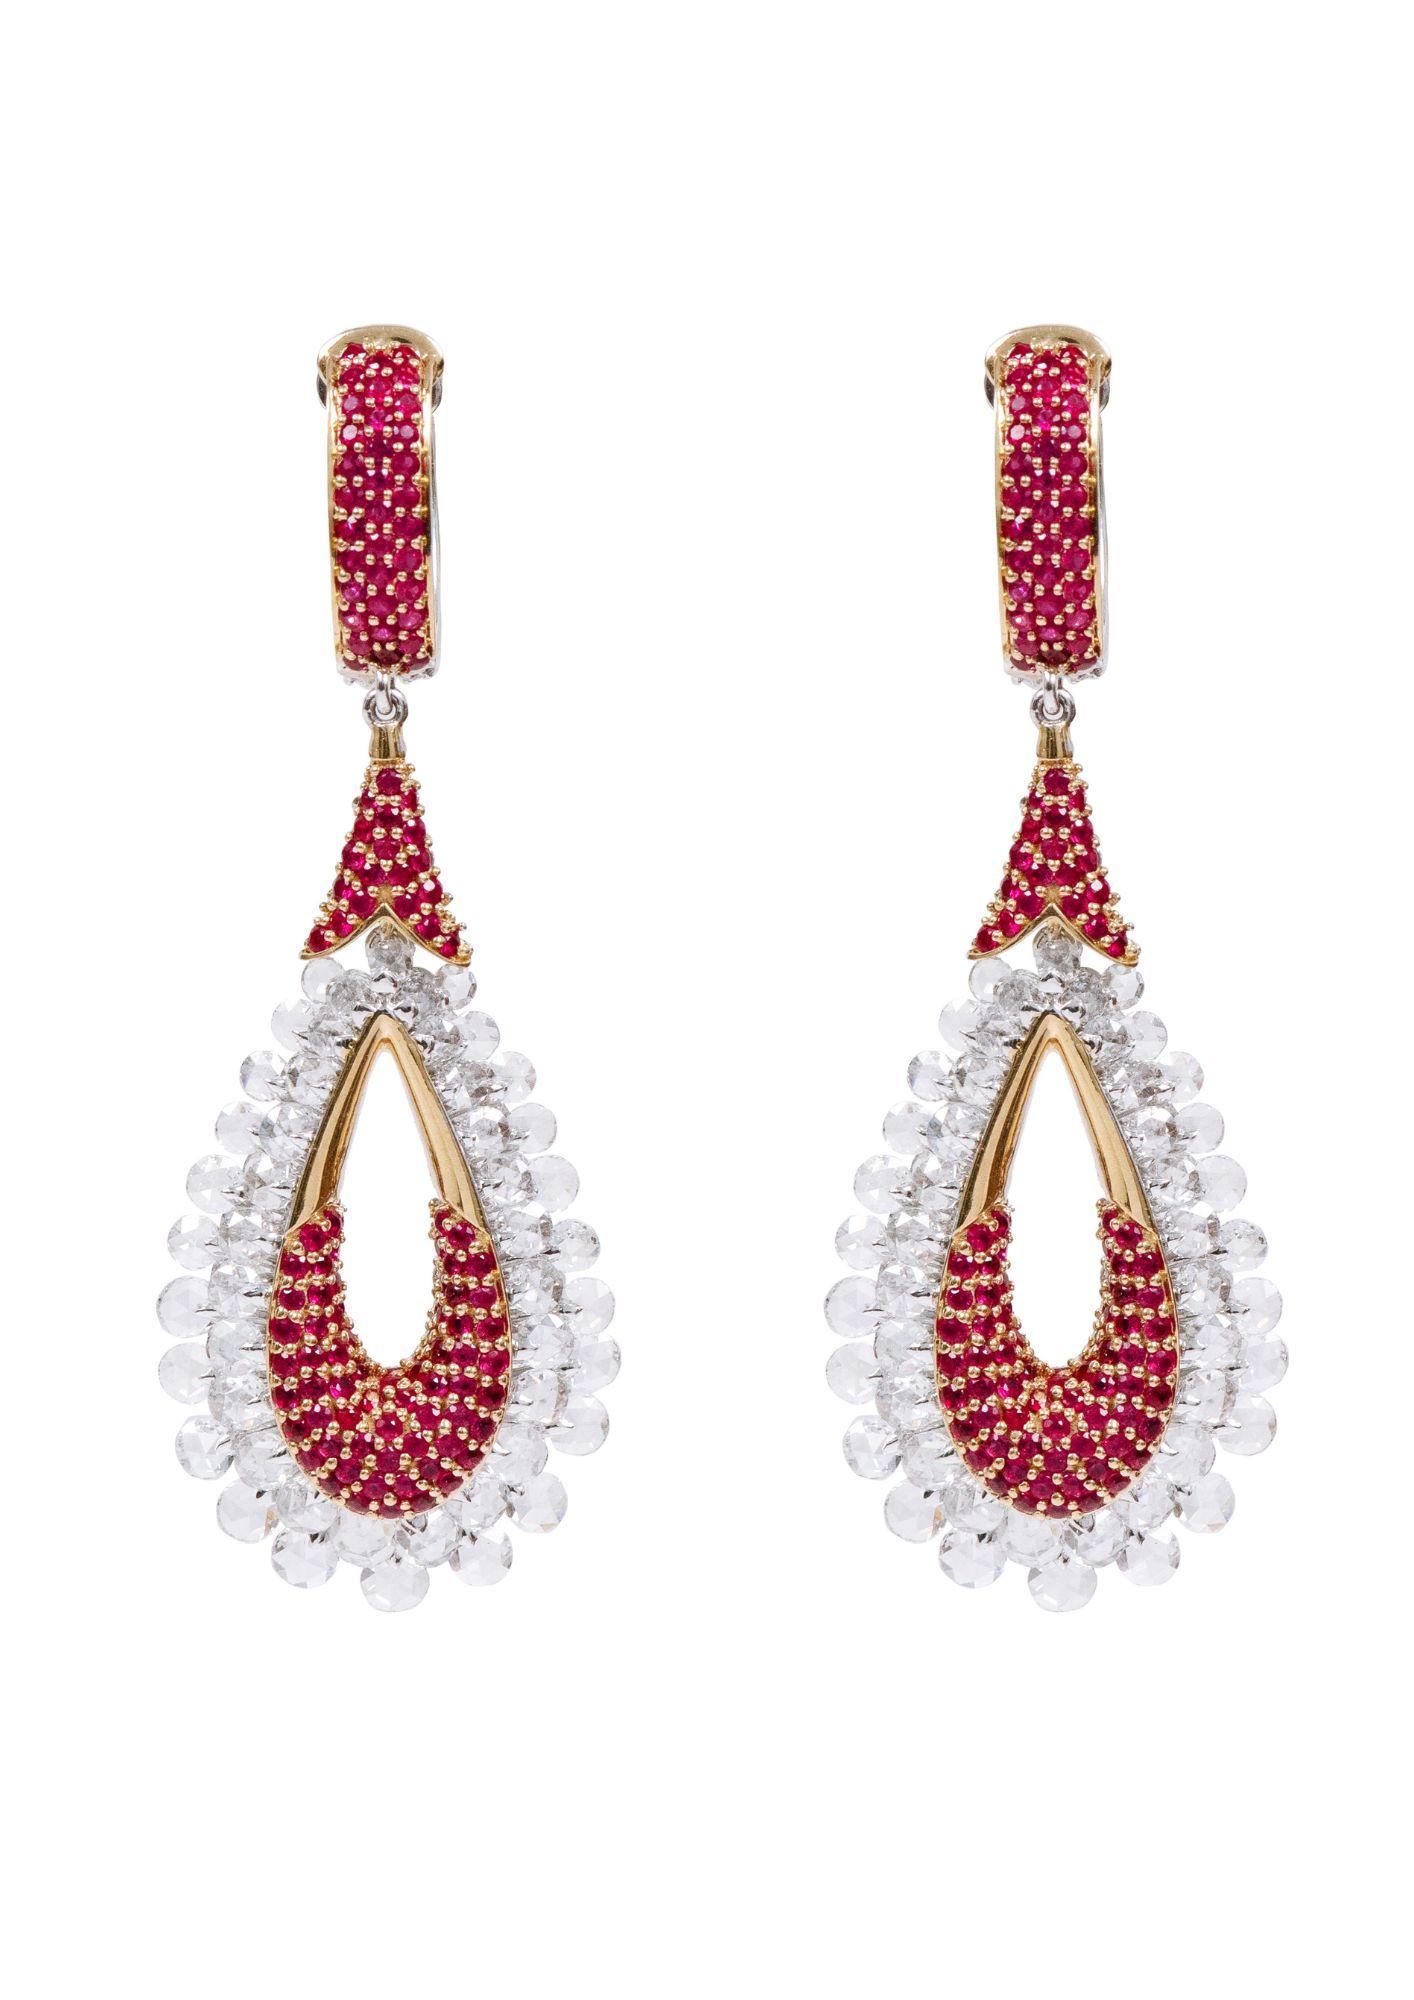 Brilliant Cut 18 Karat Gold 8.51 Carats Diamond and Ruby Reversible Cocktail Earrings For Sale